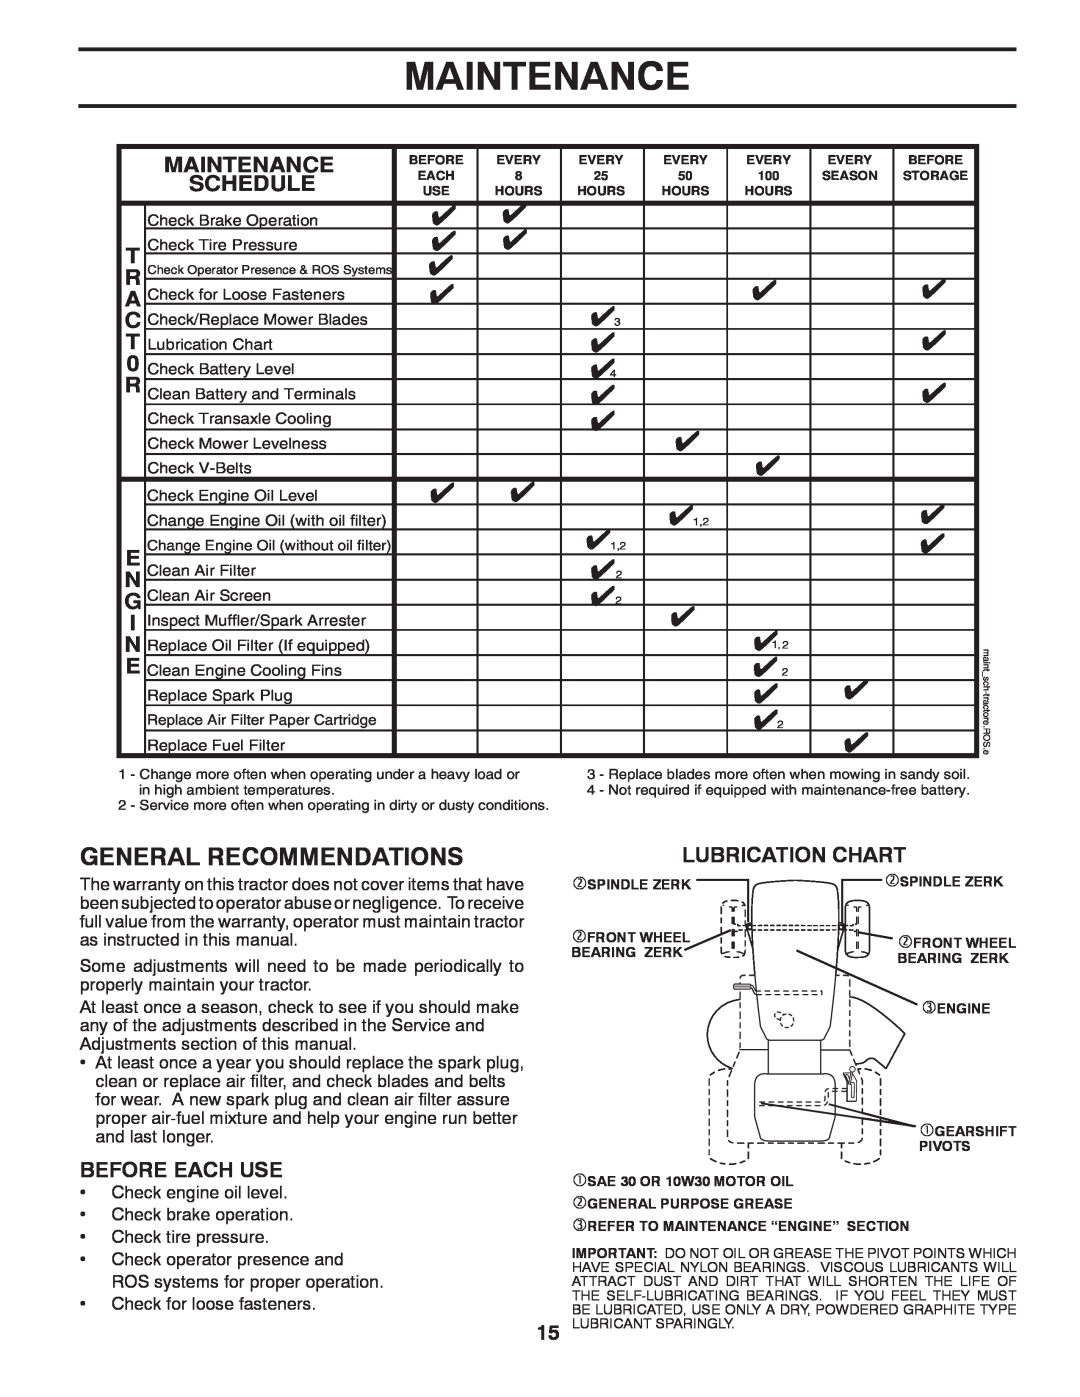 Weed Eater 96018000100, 435073 manual Maintenance, Lubrication Chart 